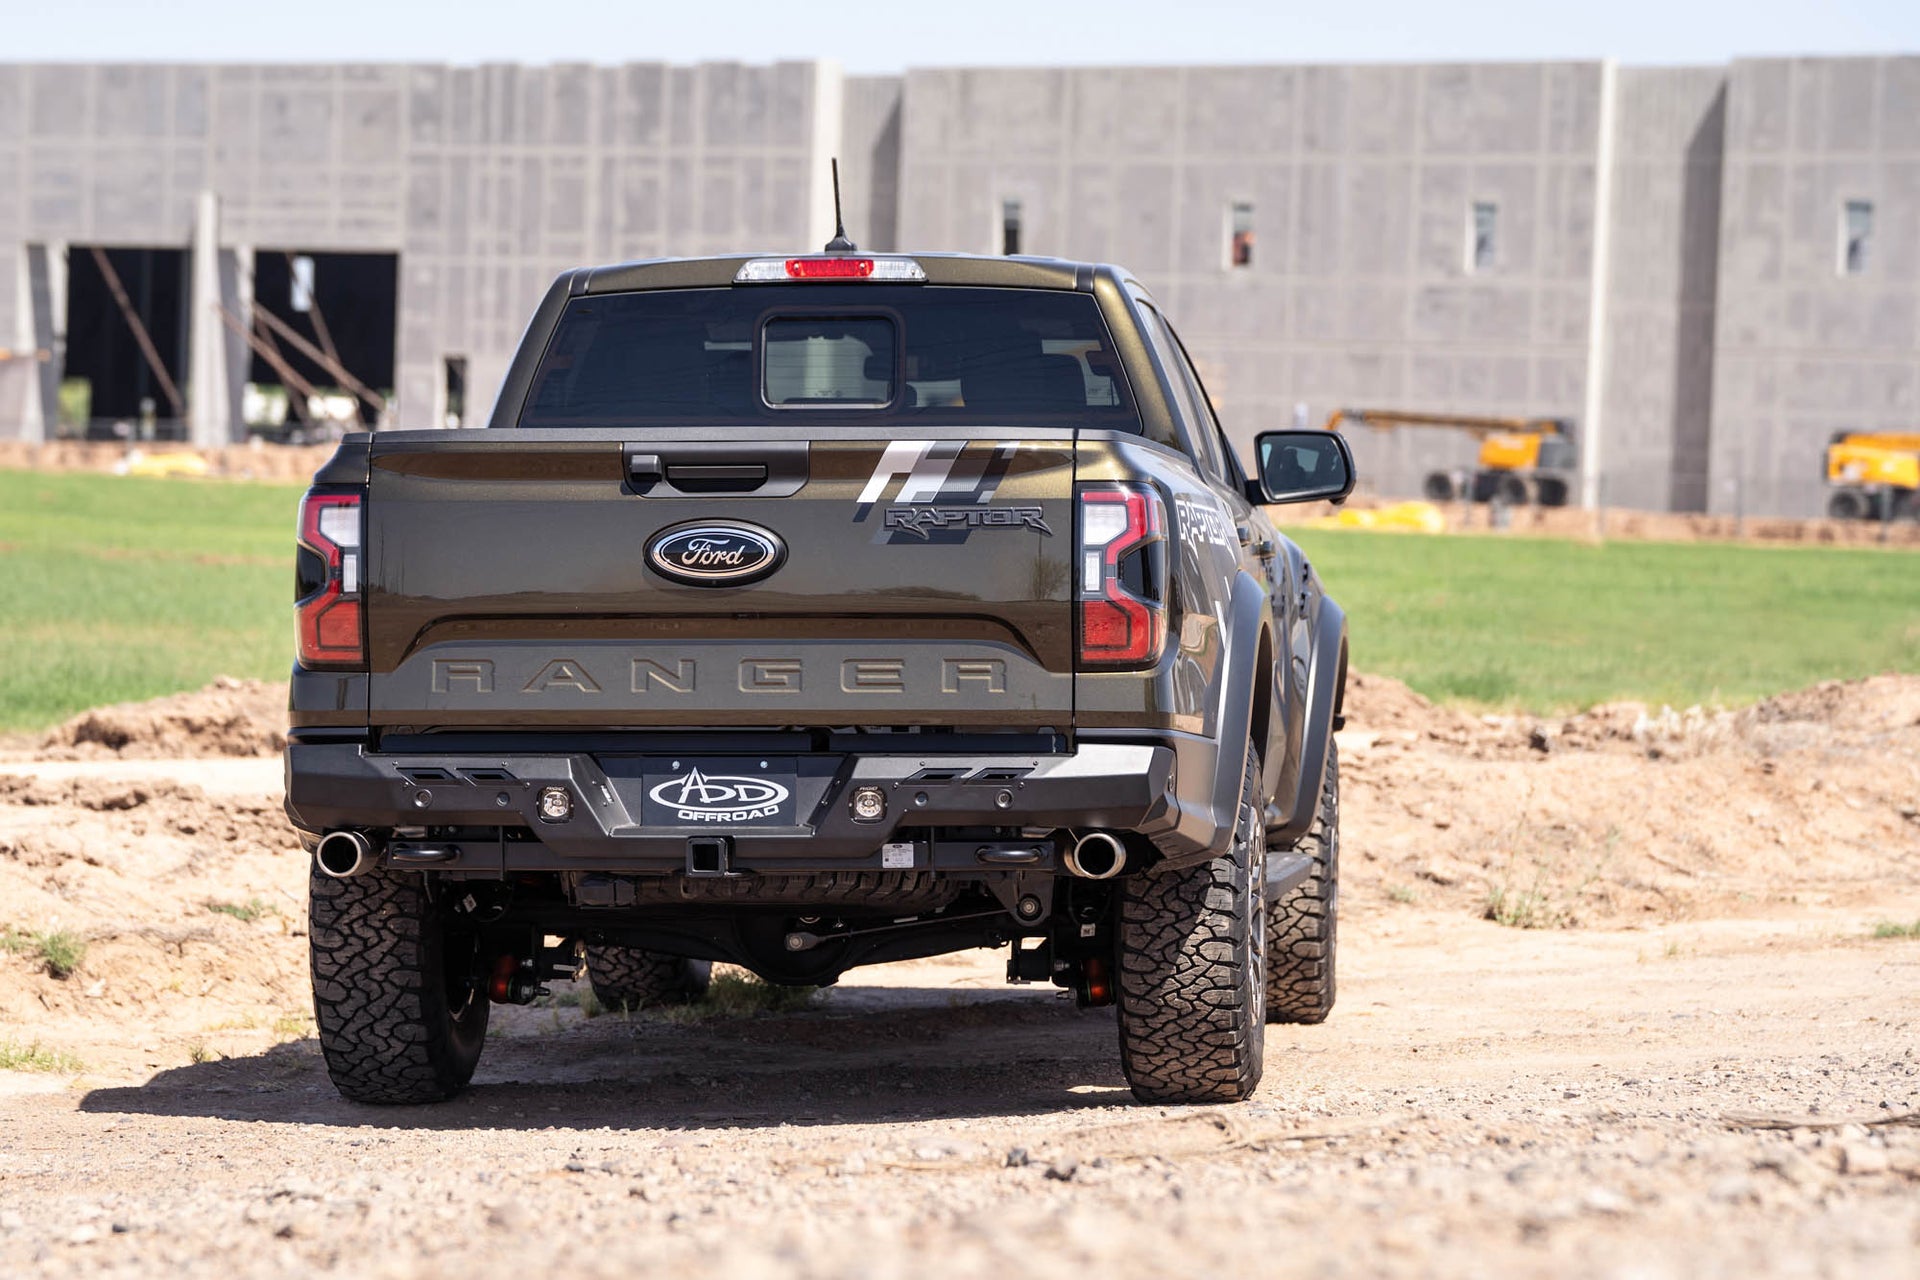 Off Road with the new Ford Ranger Raptor, Phantom Rear Bumper installed